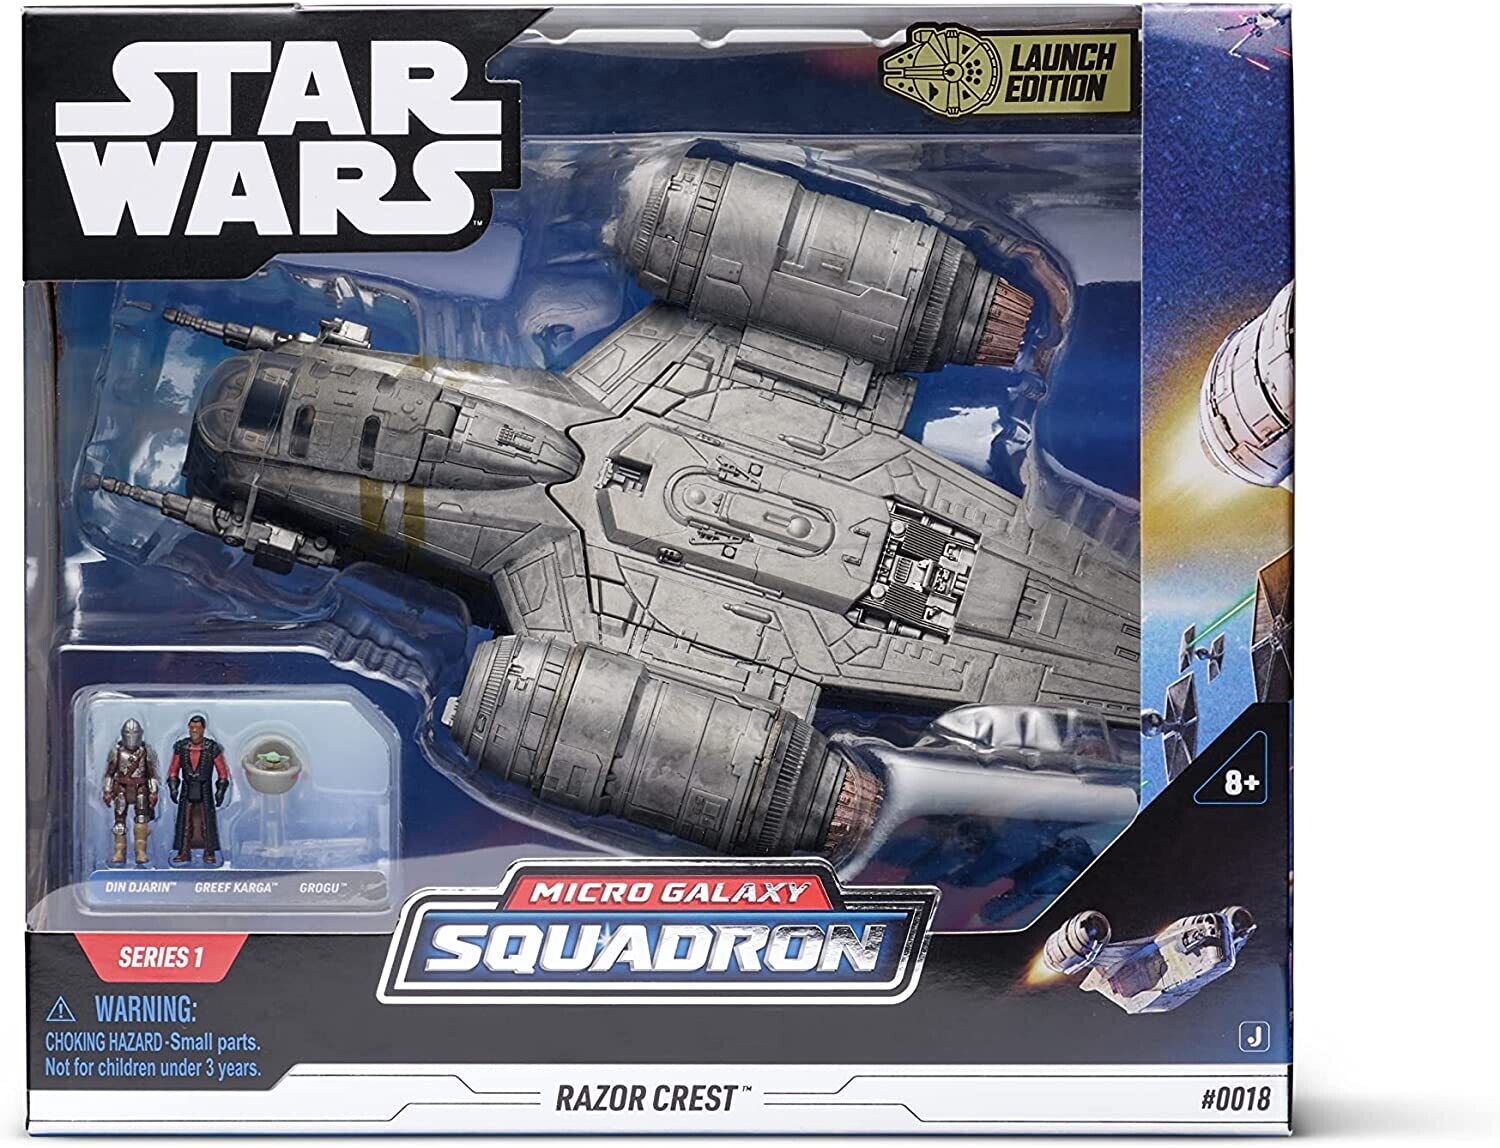 Pre-order: Star Wars Micro Galaxy Squadron Vehicle with Figures with Figures Razor Crest 20 cm